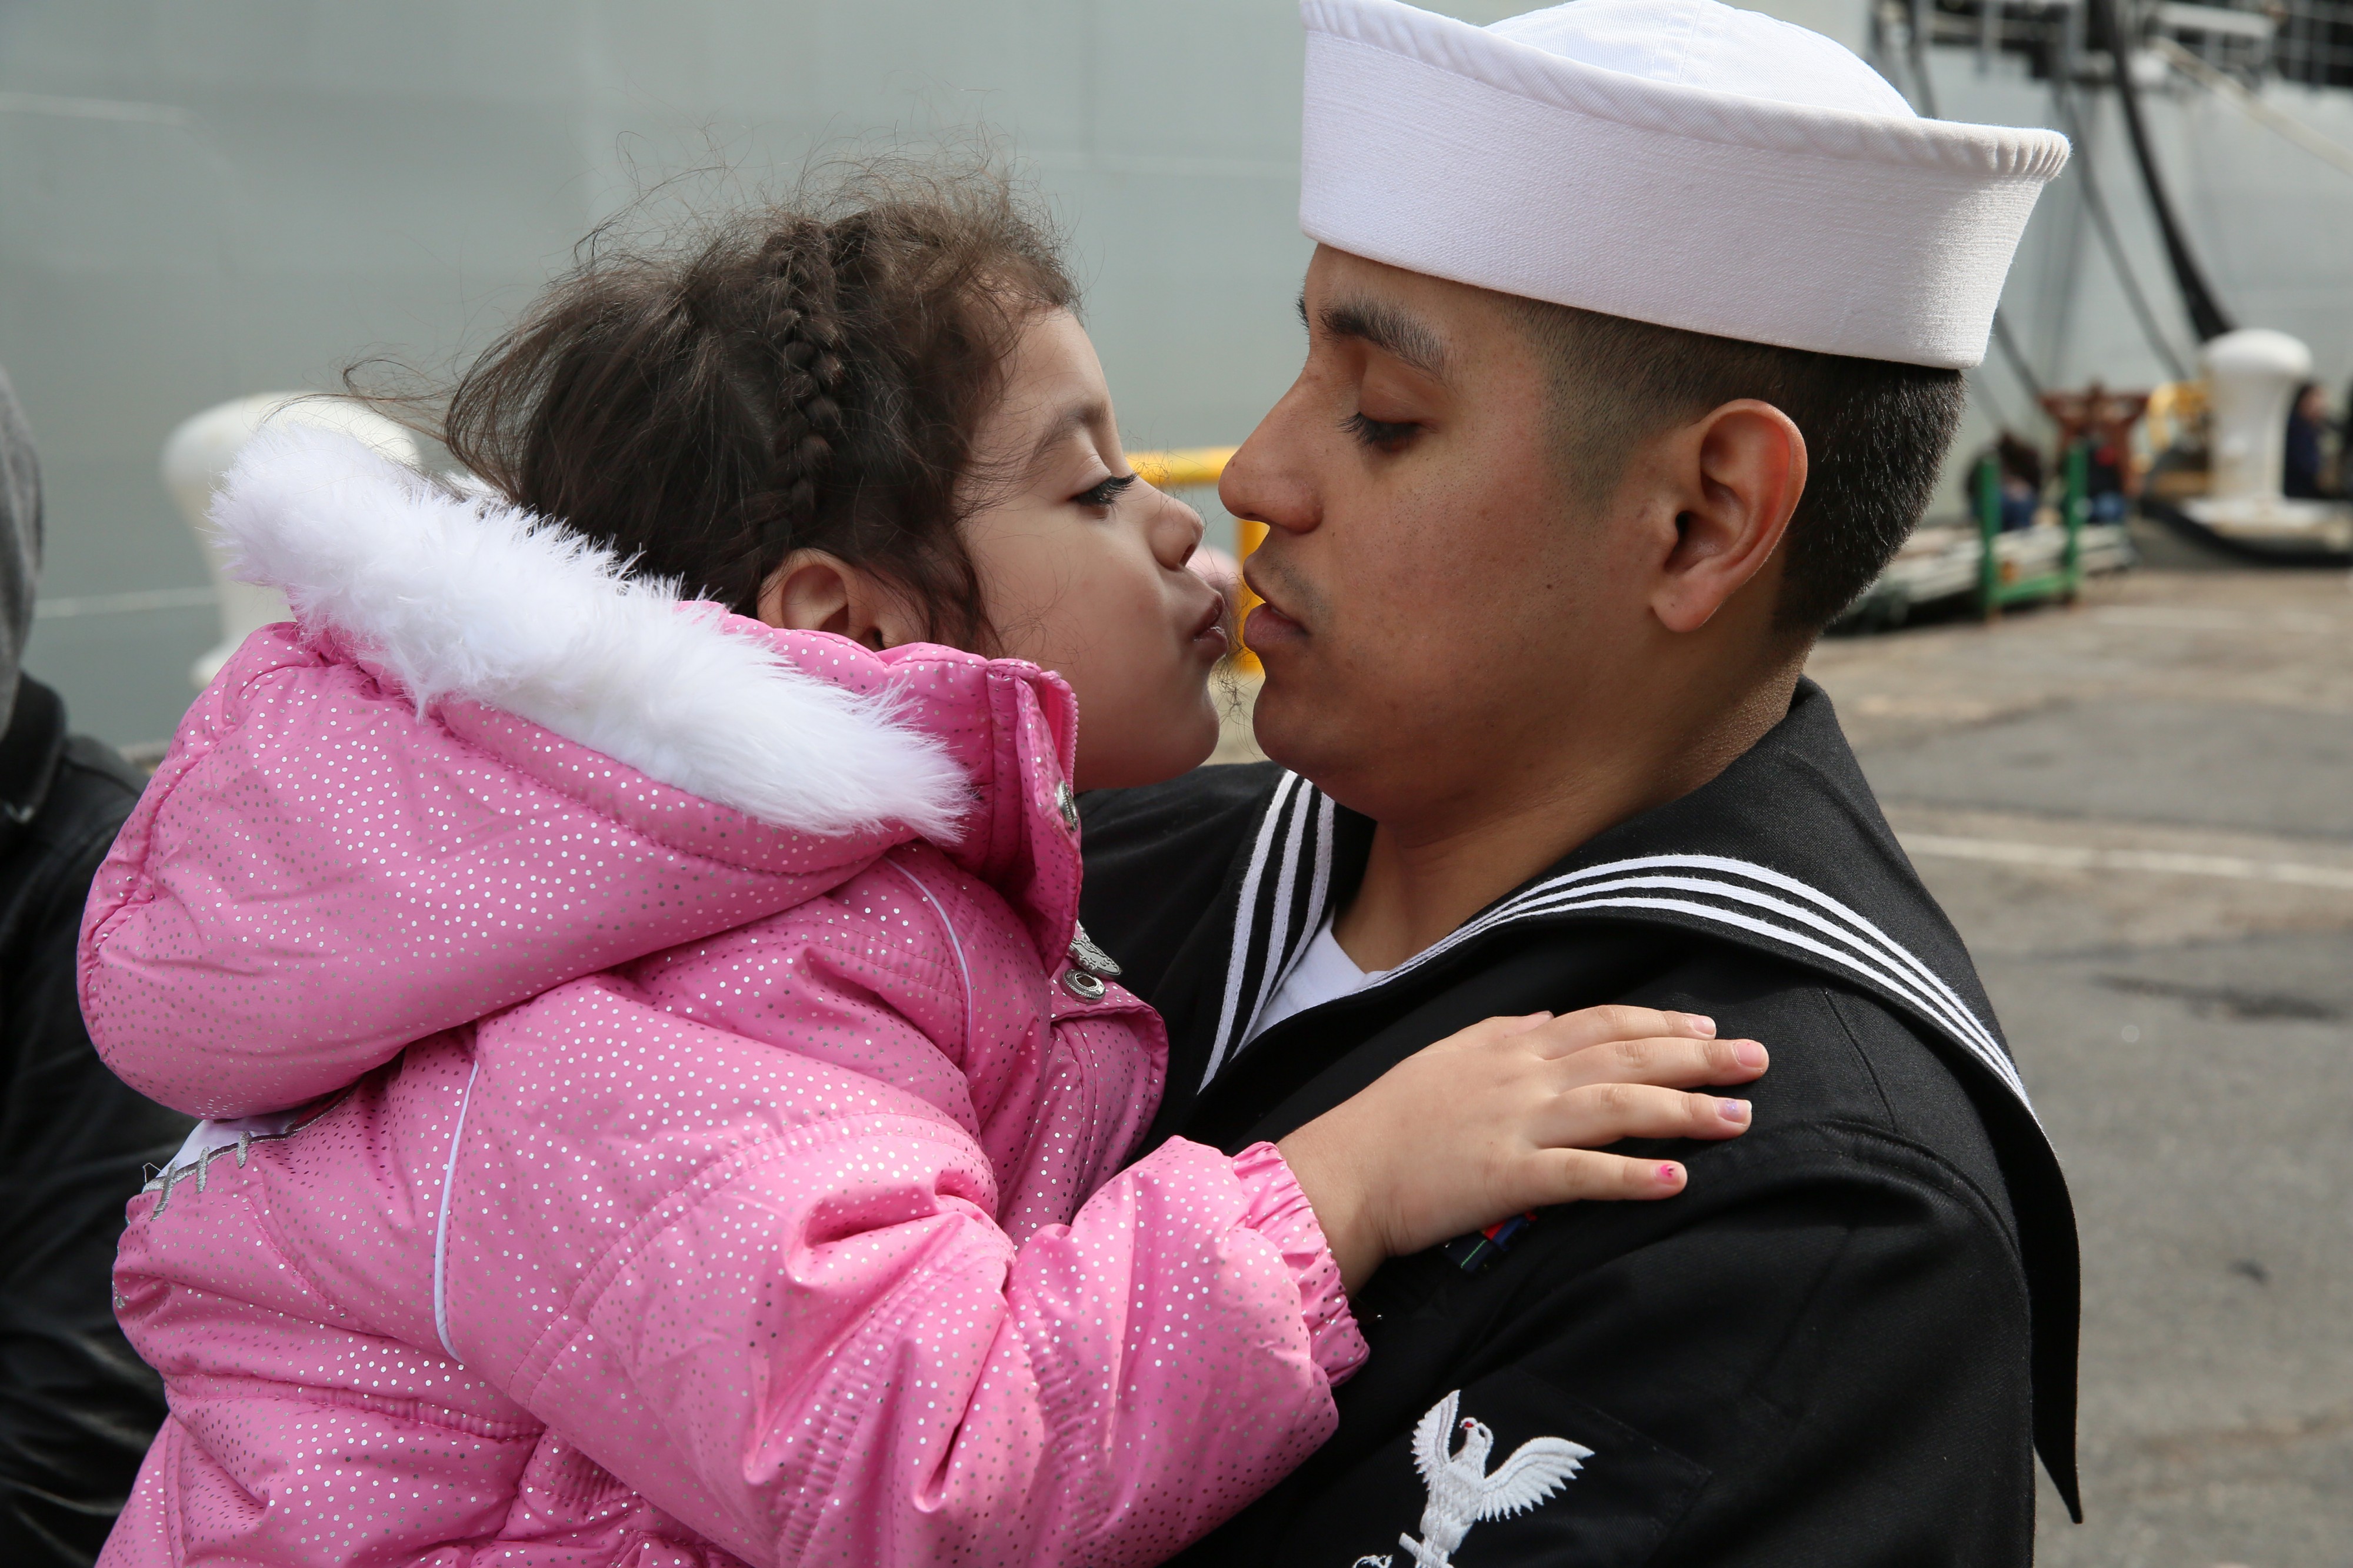 U.S. Navy Mass Communication Specialist 2nd Class Jonathan Vargas, right, assigned to the amphibious assault ship USS Kearsarge (LHD 3), says goodbye to his daughter prior to boarding the ship at Naval Station 130311-N-SB587-021